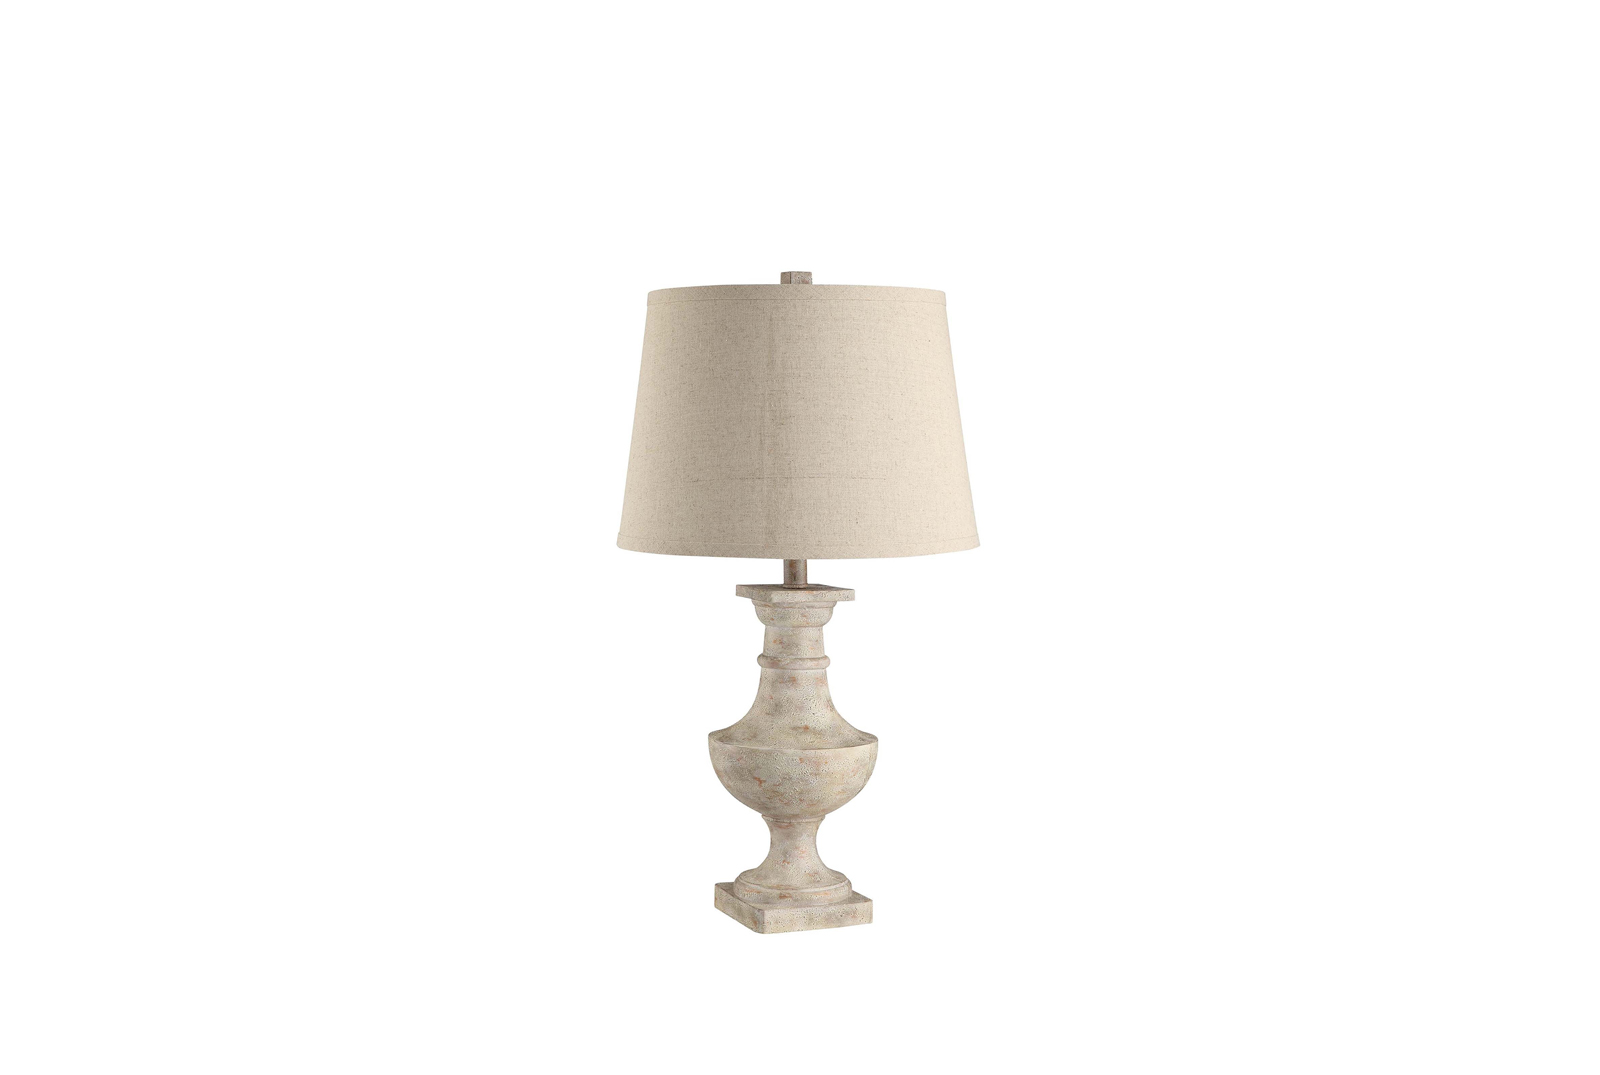 Lamp design for the living room - Beautiful Homes